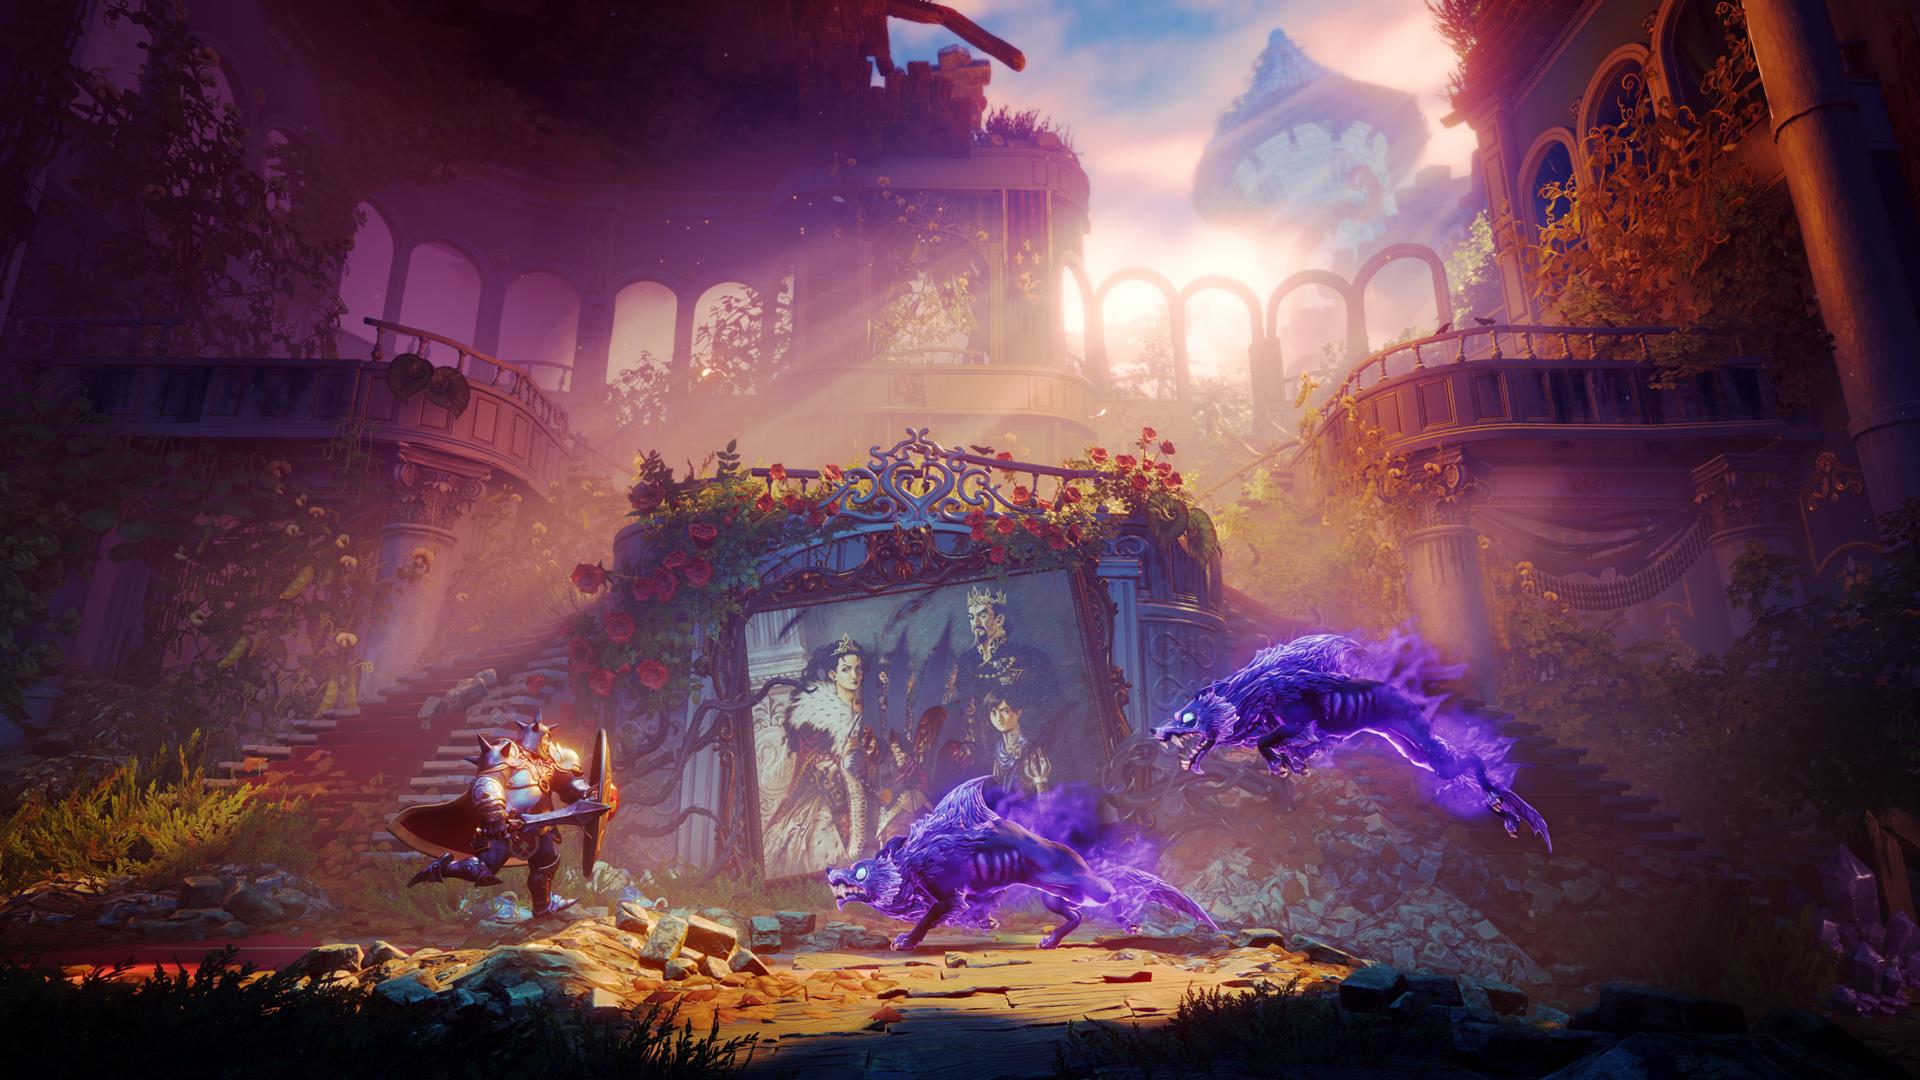 download trine 2 ps4